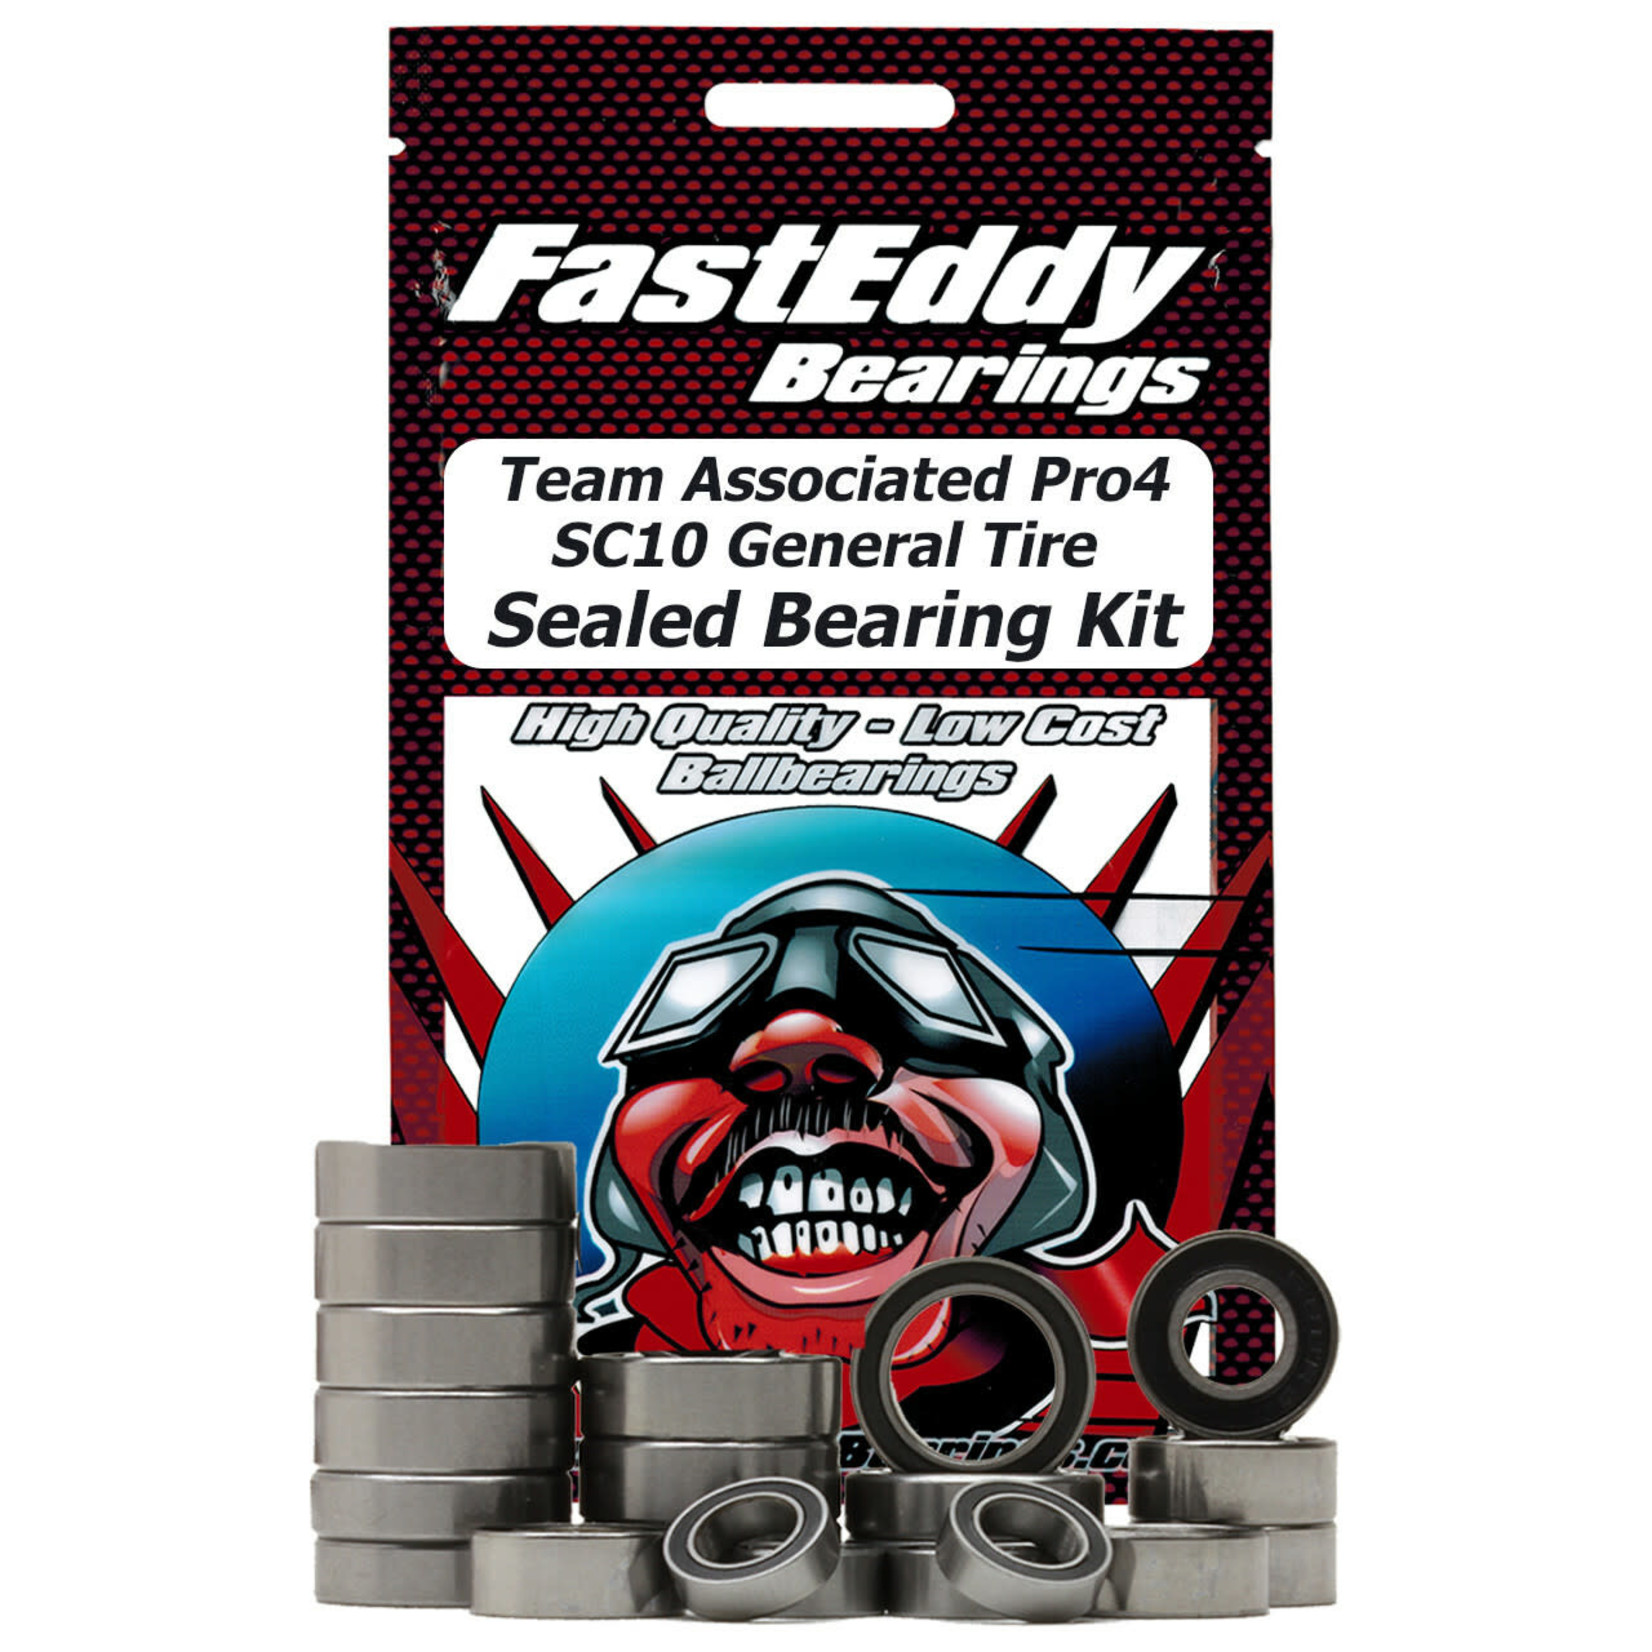 FastEddy Team Associated Pro4 SC10 General Tire Sealed Bearing Kit #TFE7400